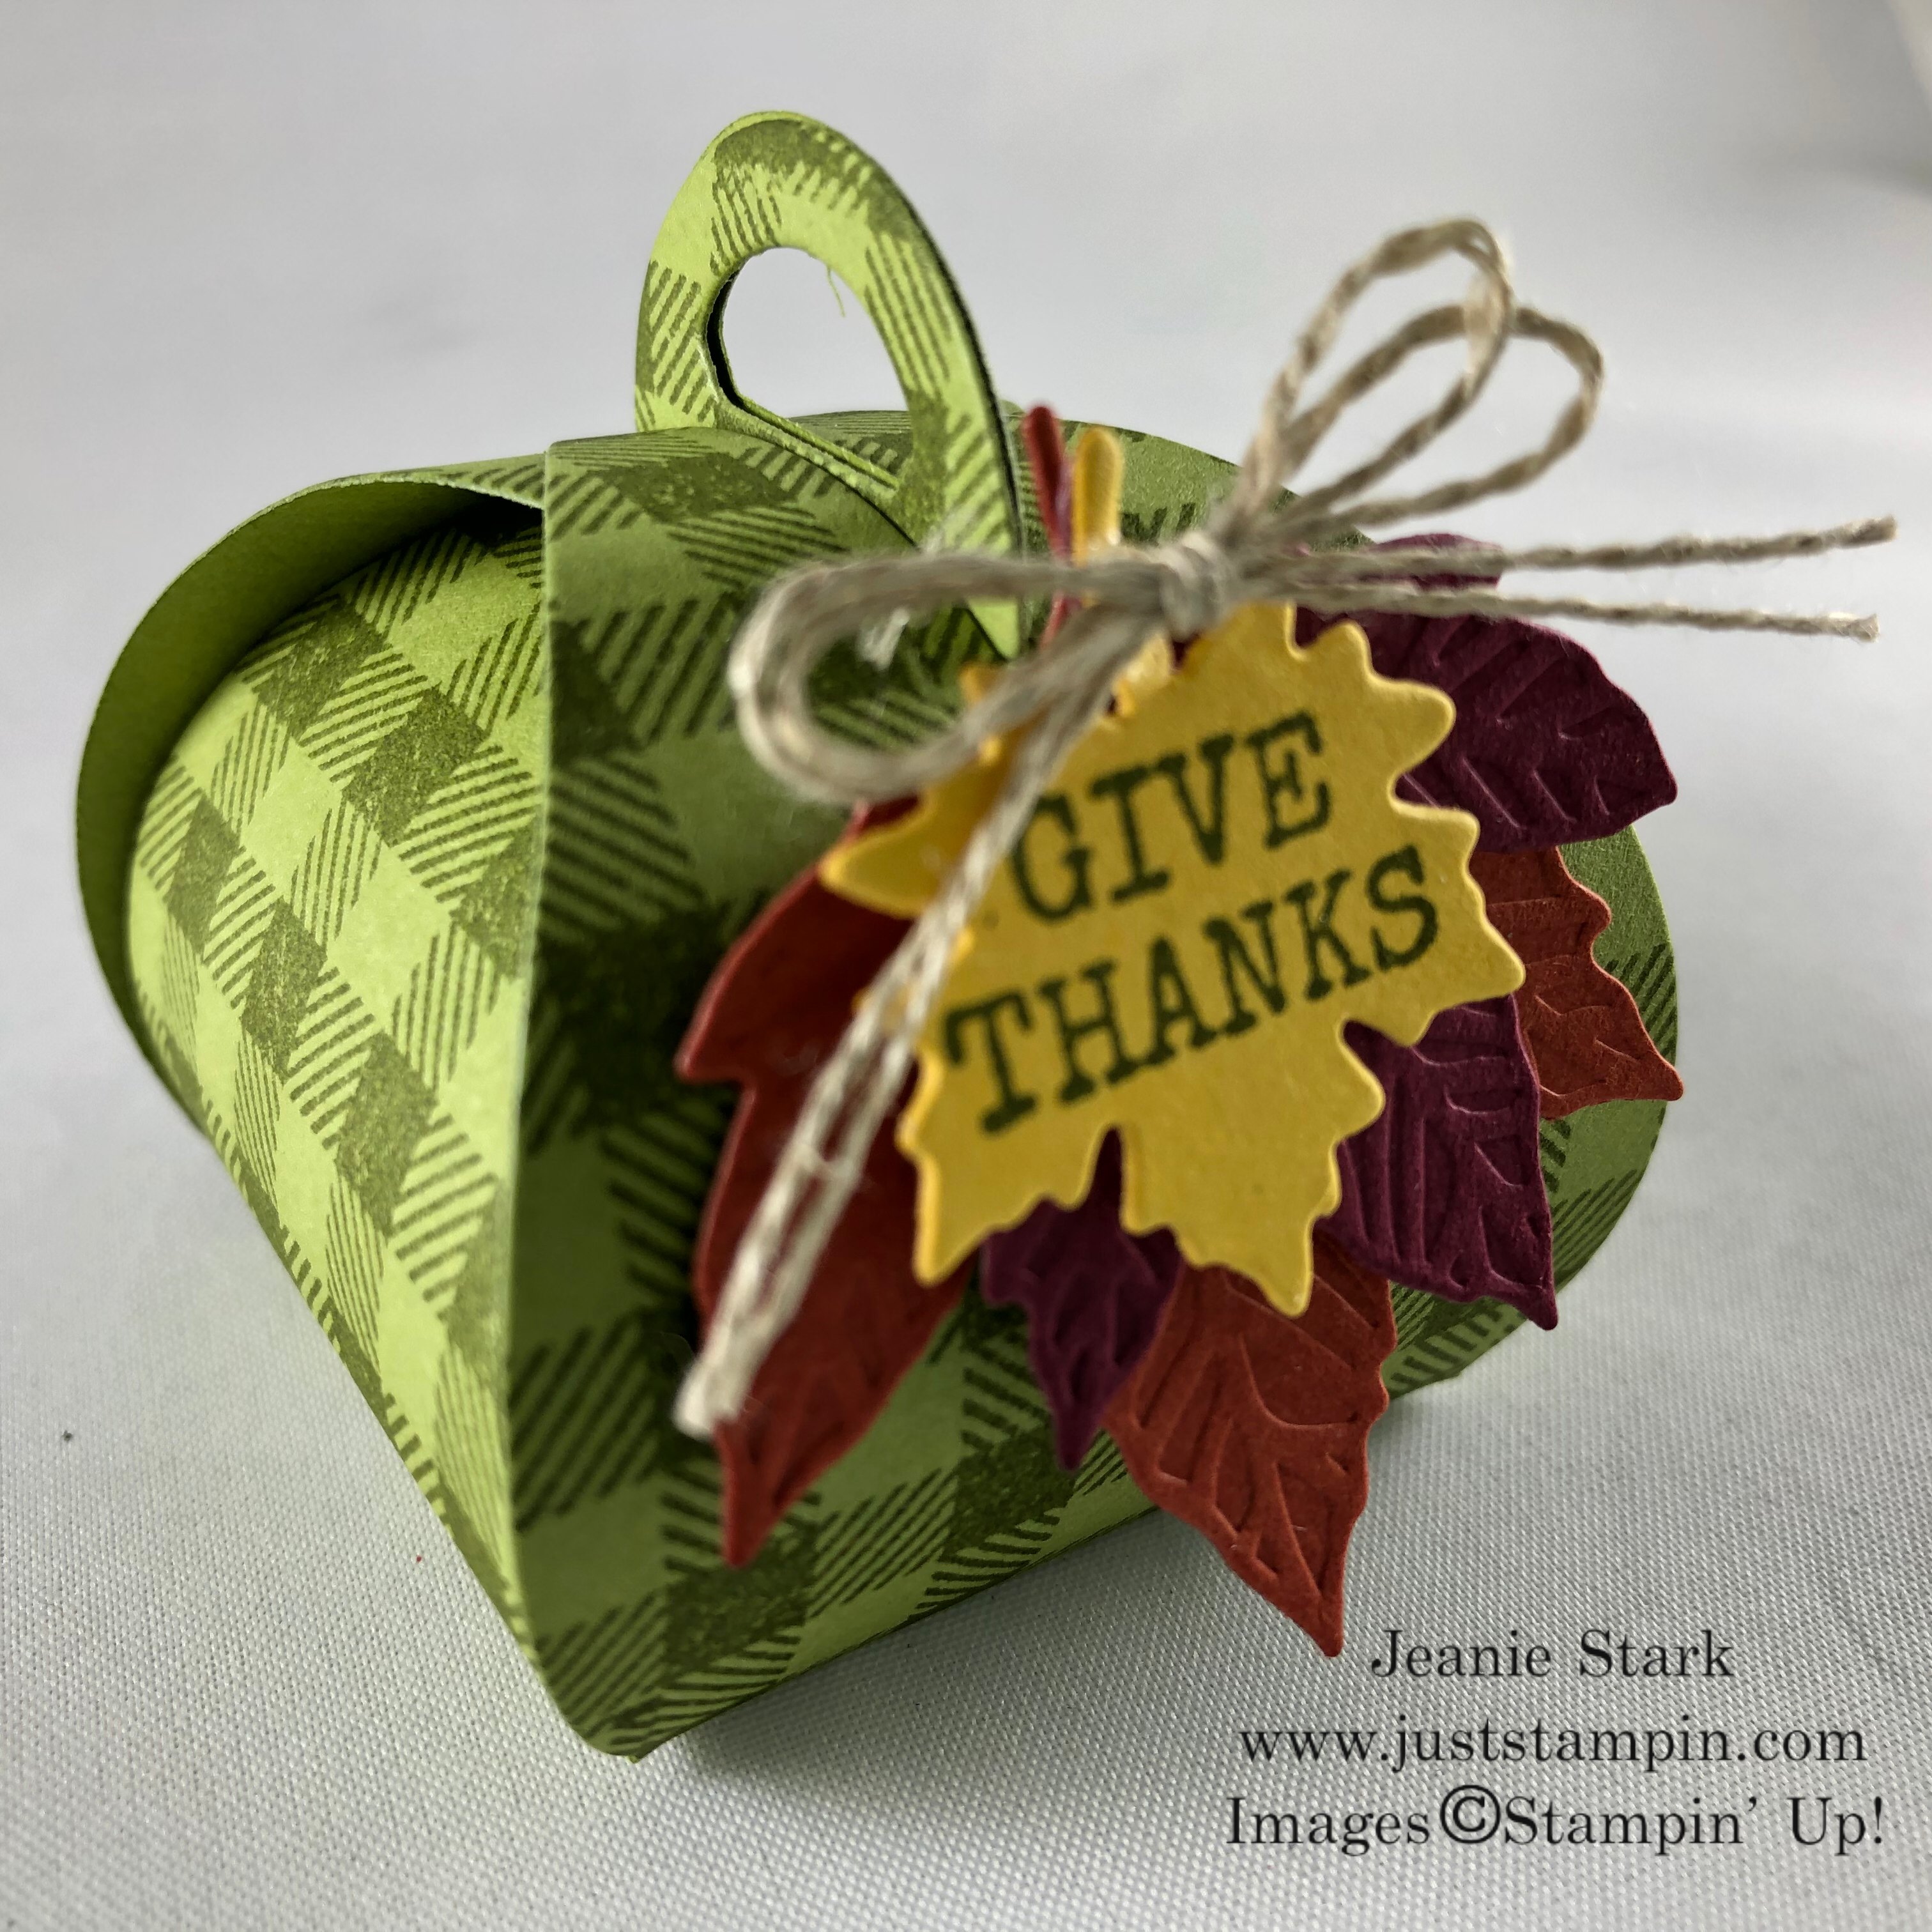 Stampin' Up! Gathered Leaves and Mini Curvy Keepsakes Box Dies Fall or Thanksgiving treat holder idea - Jeanie Stark StampinUp